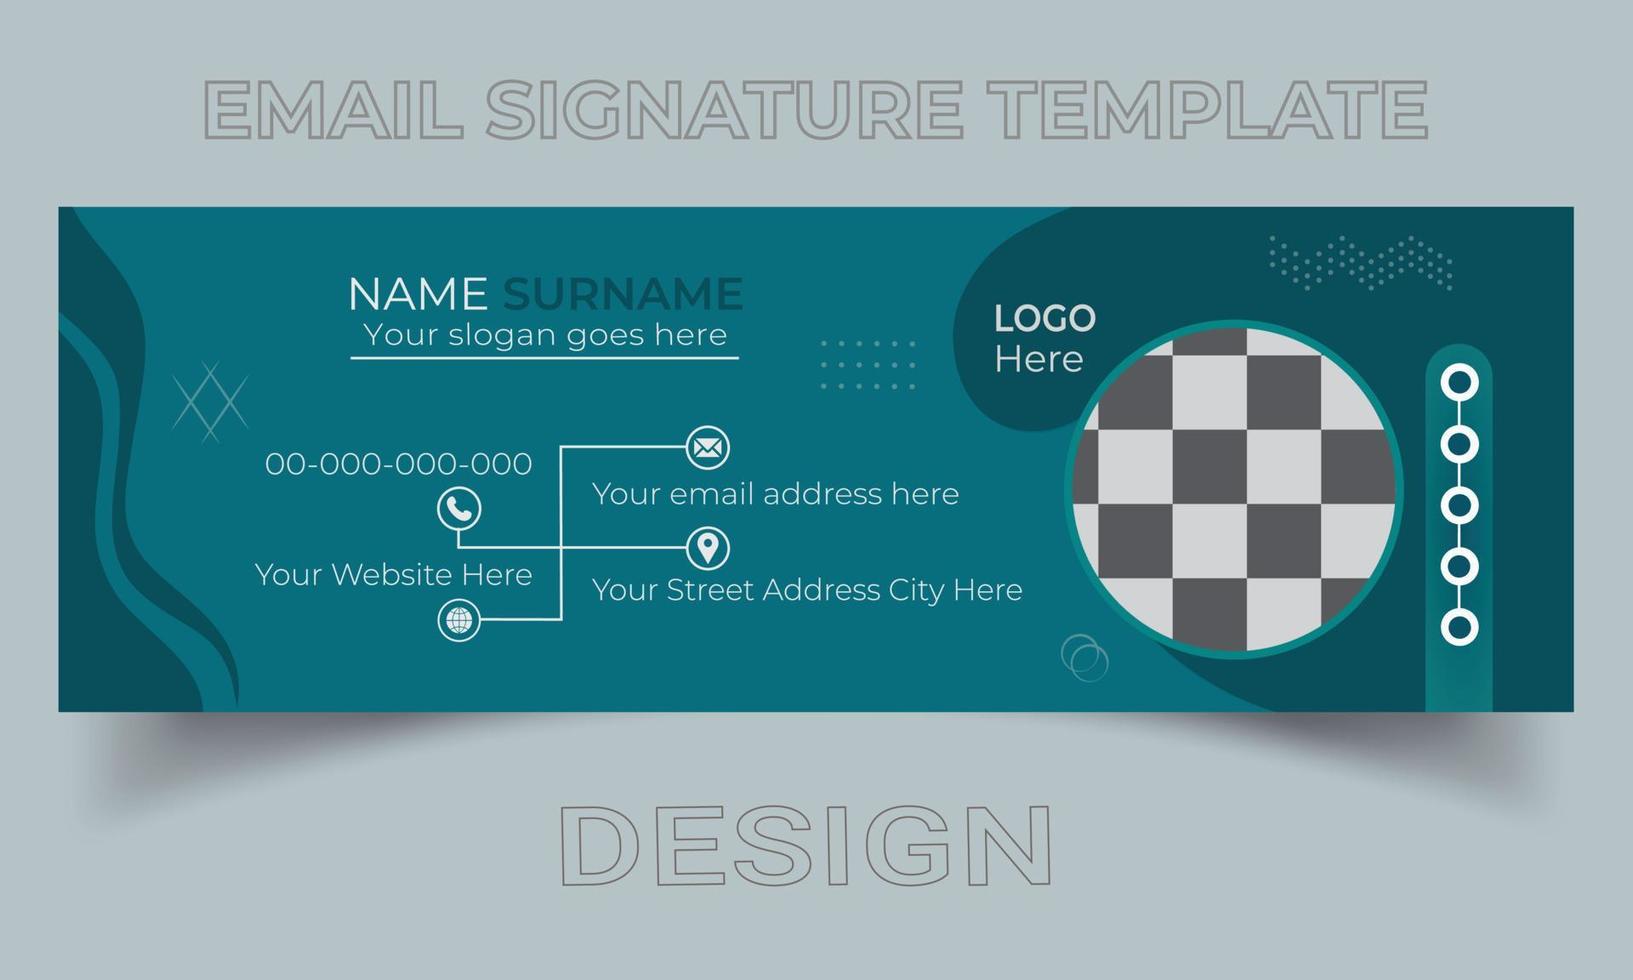 Email signature template or email footer personal social media banner design vector